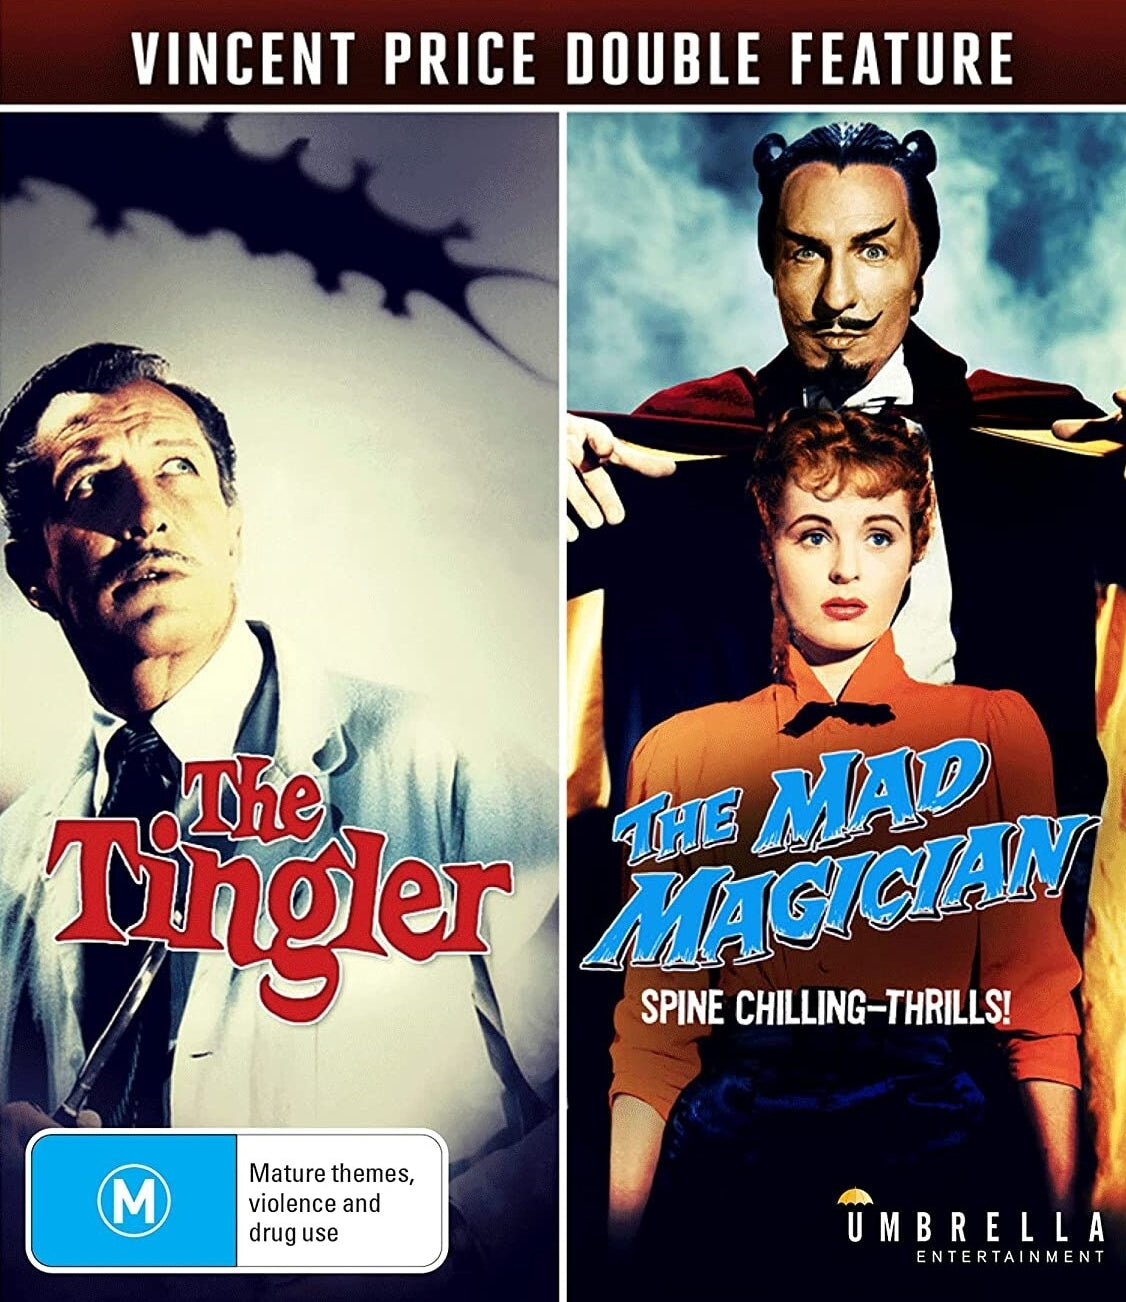 VINCENT PRICE DOUBLE FEATURE (REGION FREE IMPORT) BLU-RAY